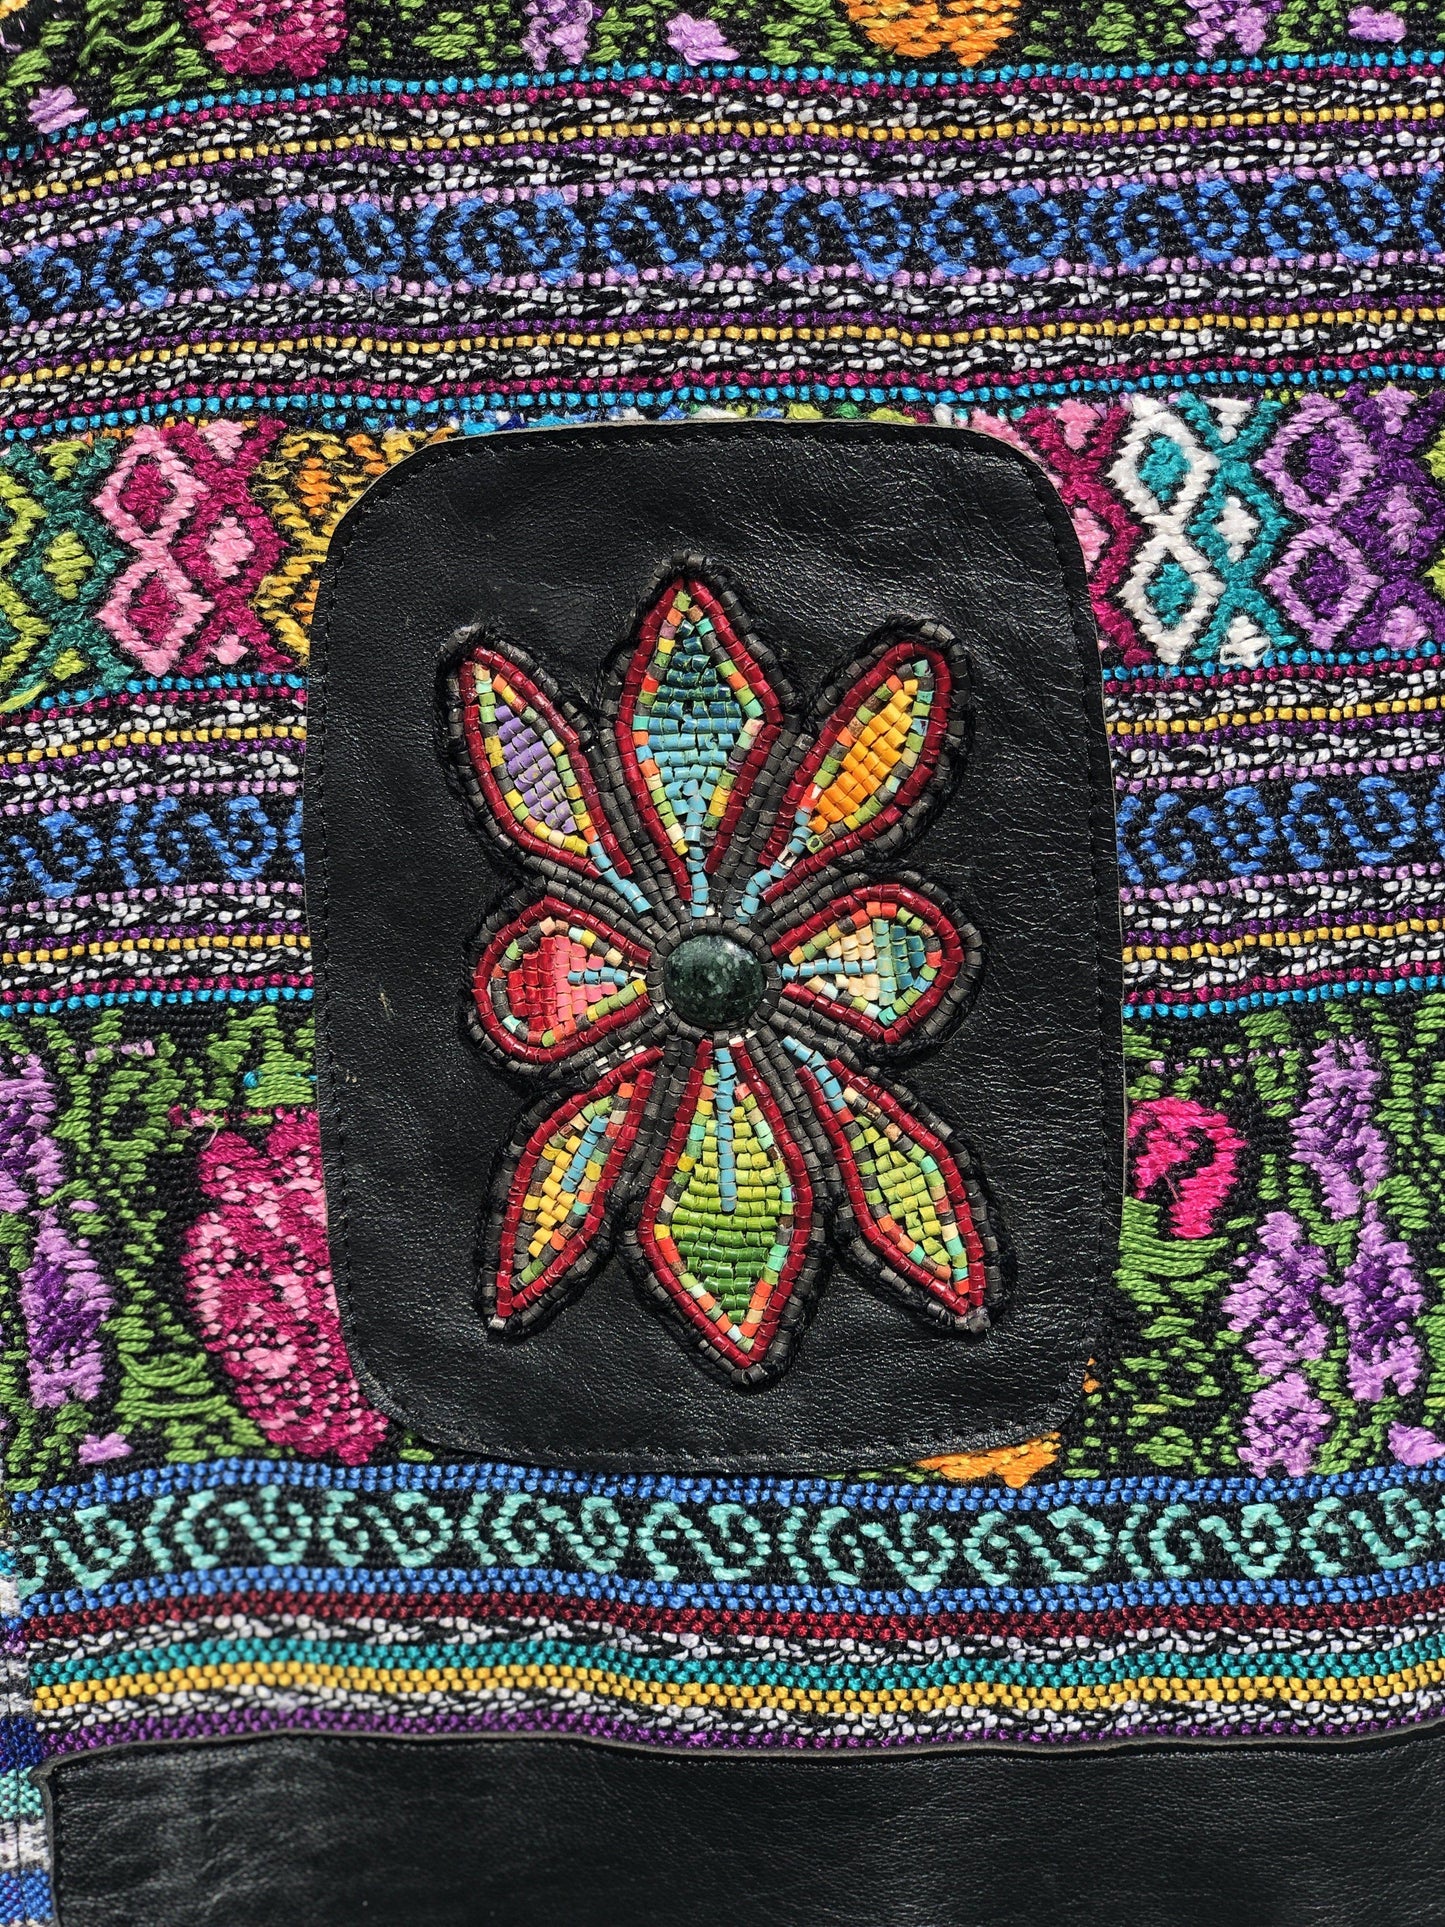 Shawl Poncho with Fringes - "Huipil Flor"